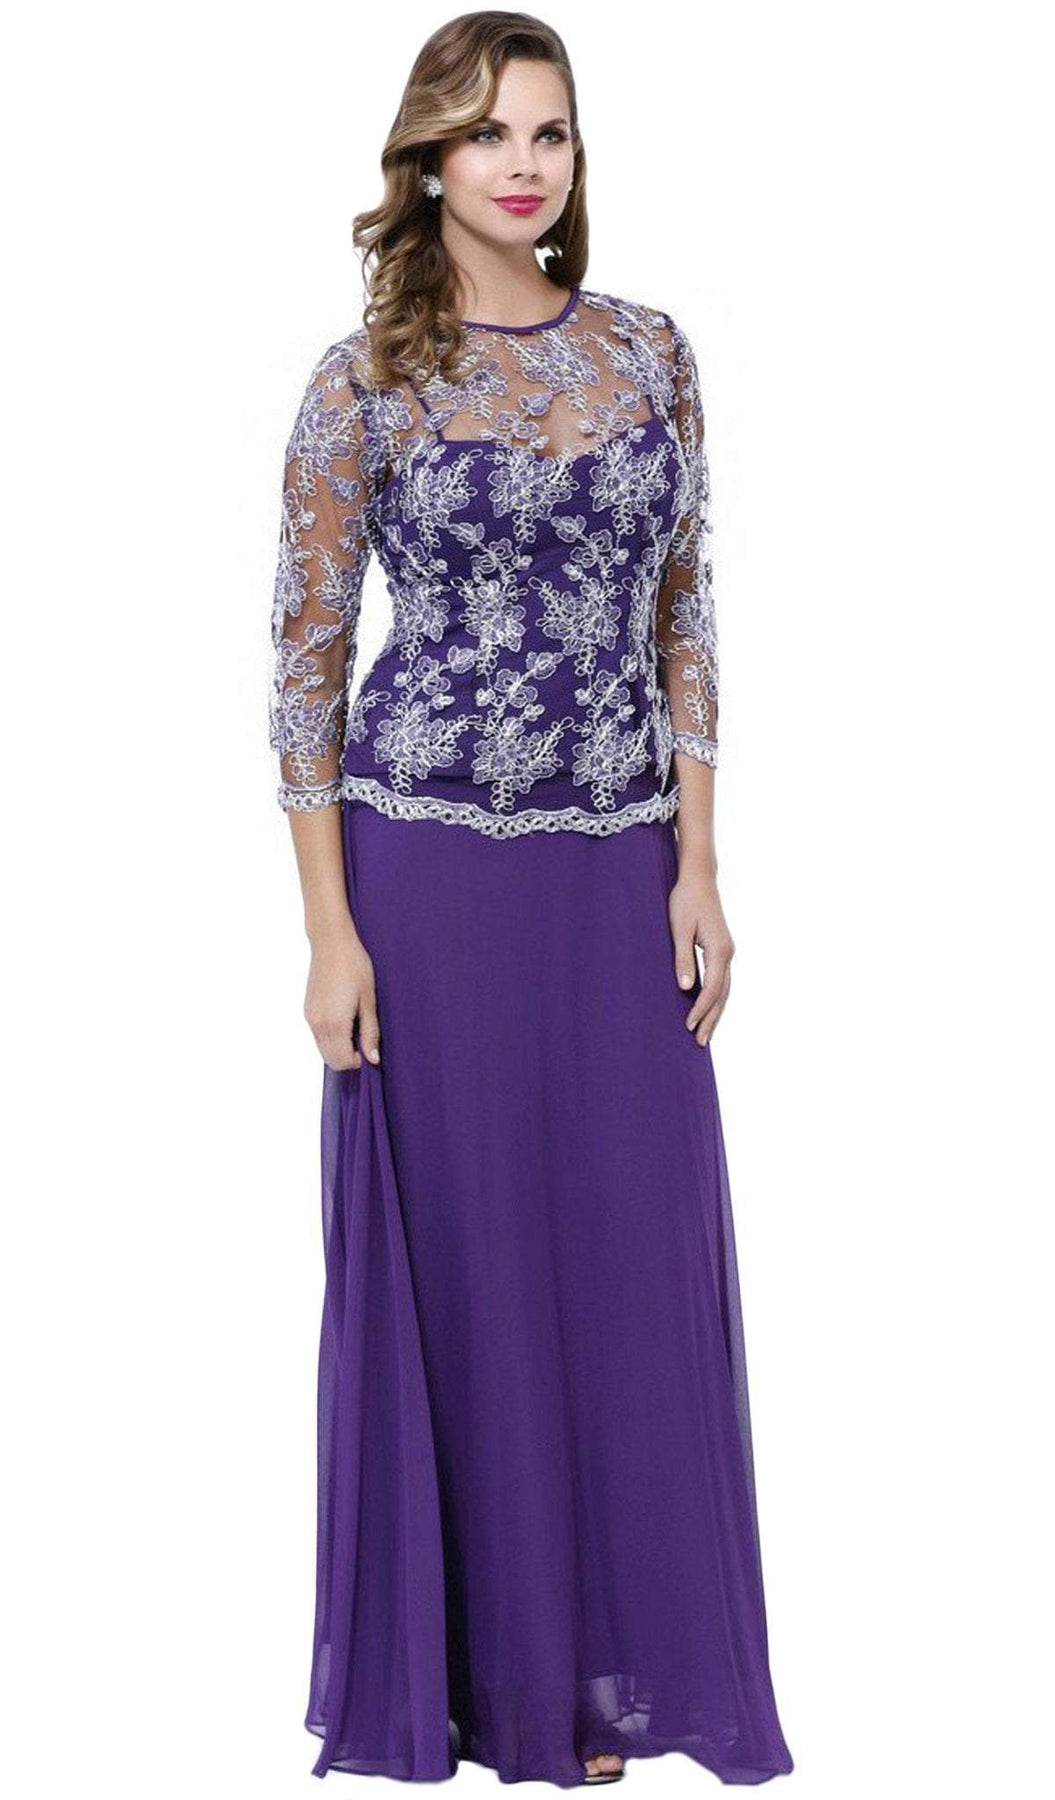 Nox Anabel - 5096 Sheer Lace Jewel Neck A-line Long Formal Dress Mother of the Bride Dresses M / Plum